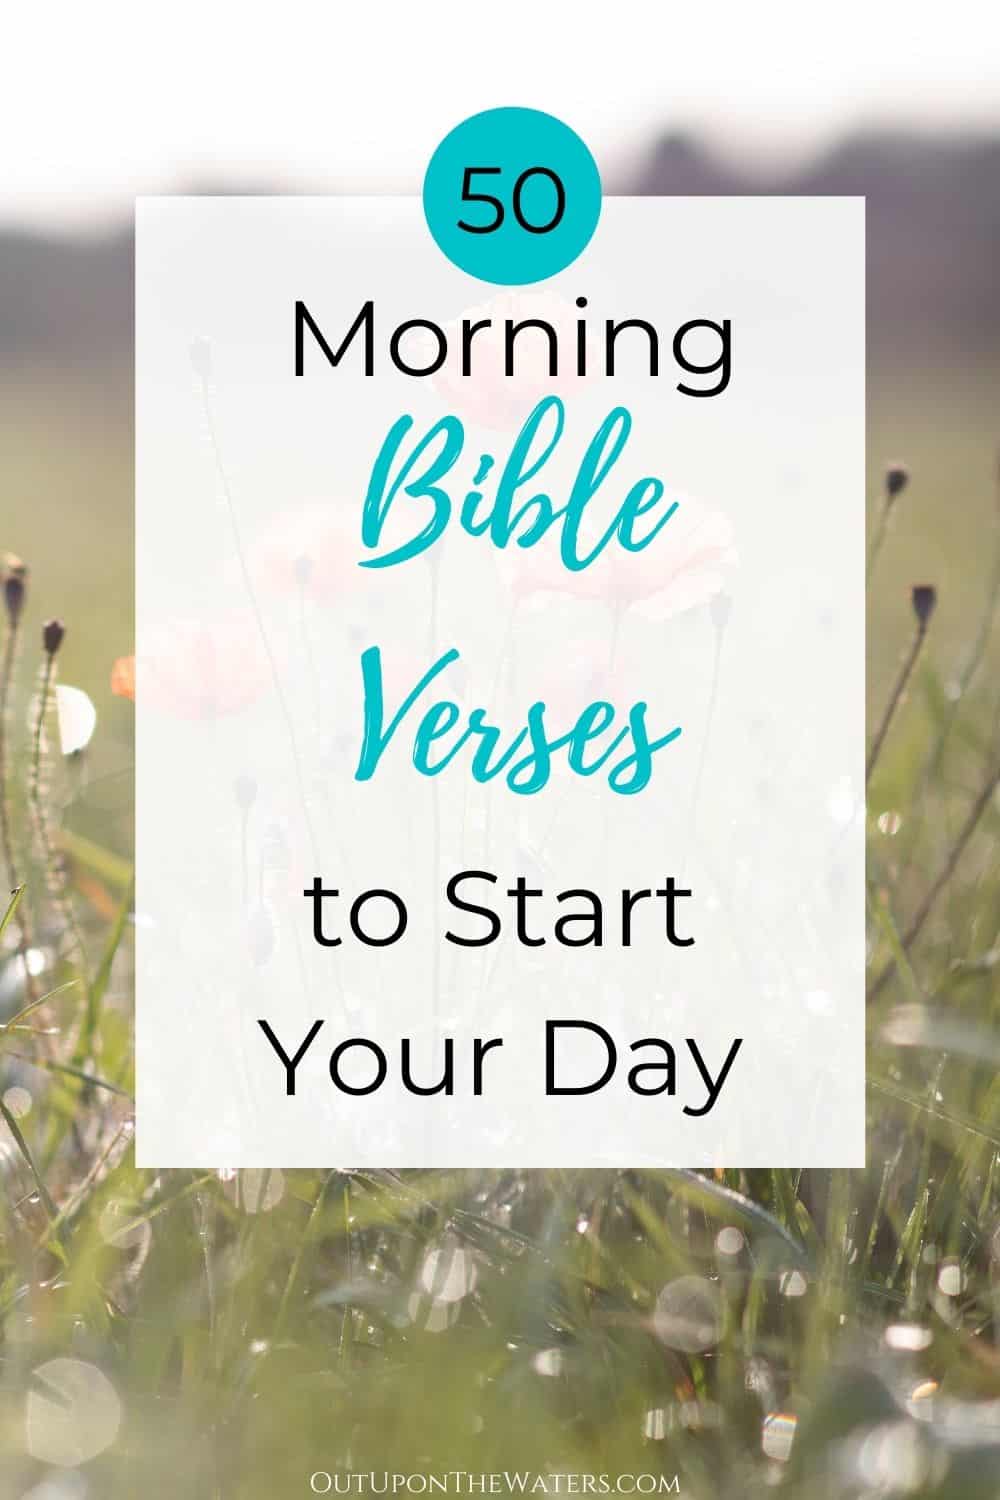  Good Motivational Quotes And Bible Verses To Start Your Day of the decade The ultimate guide 